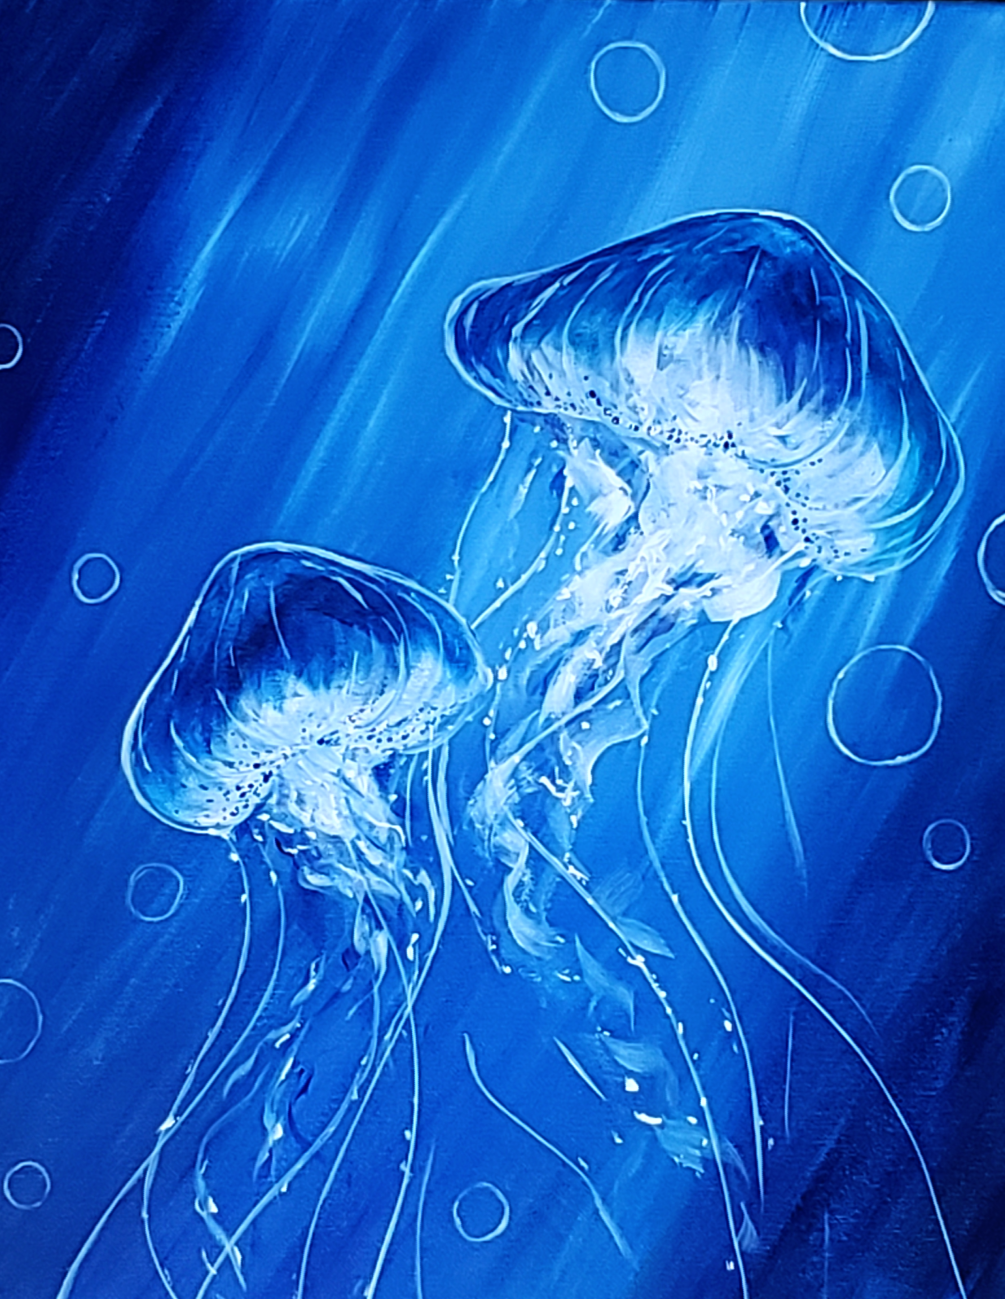 A Two Blue Jellyfish experience project by Yaymaker